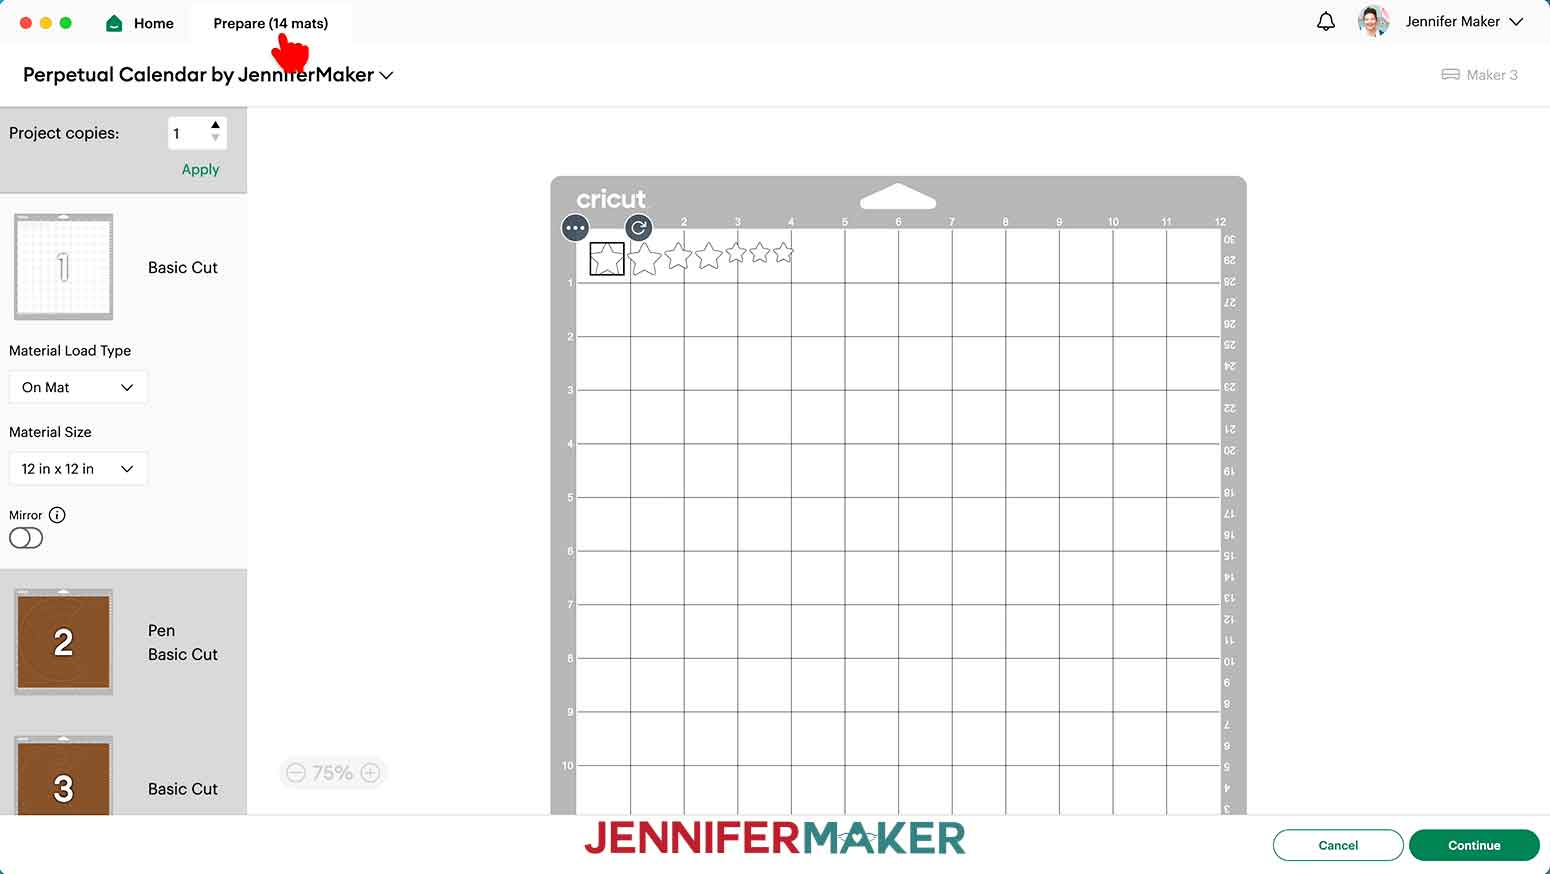 On the Cricut Design Space Prepare Screen for the perpetual calendar, there are 14 mats